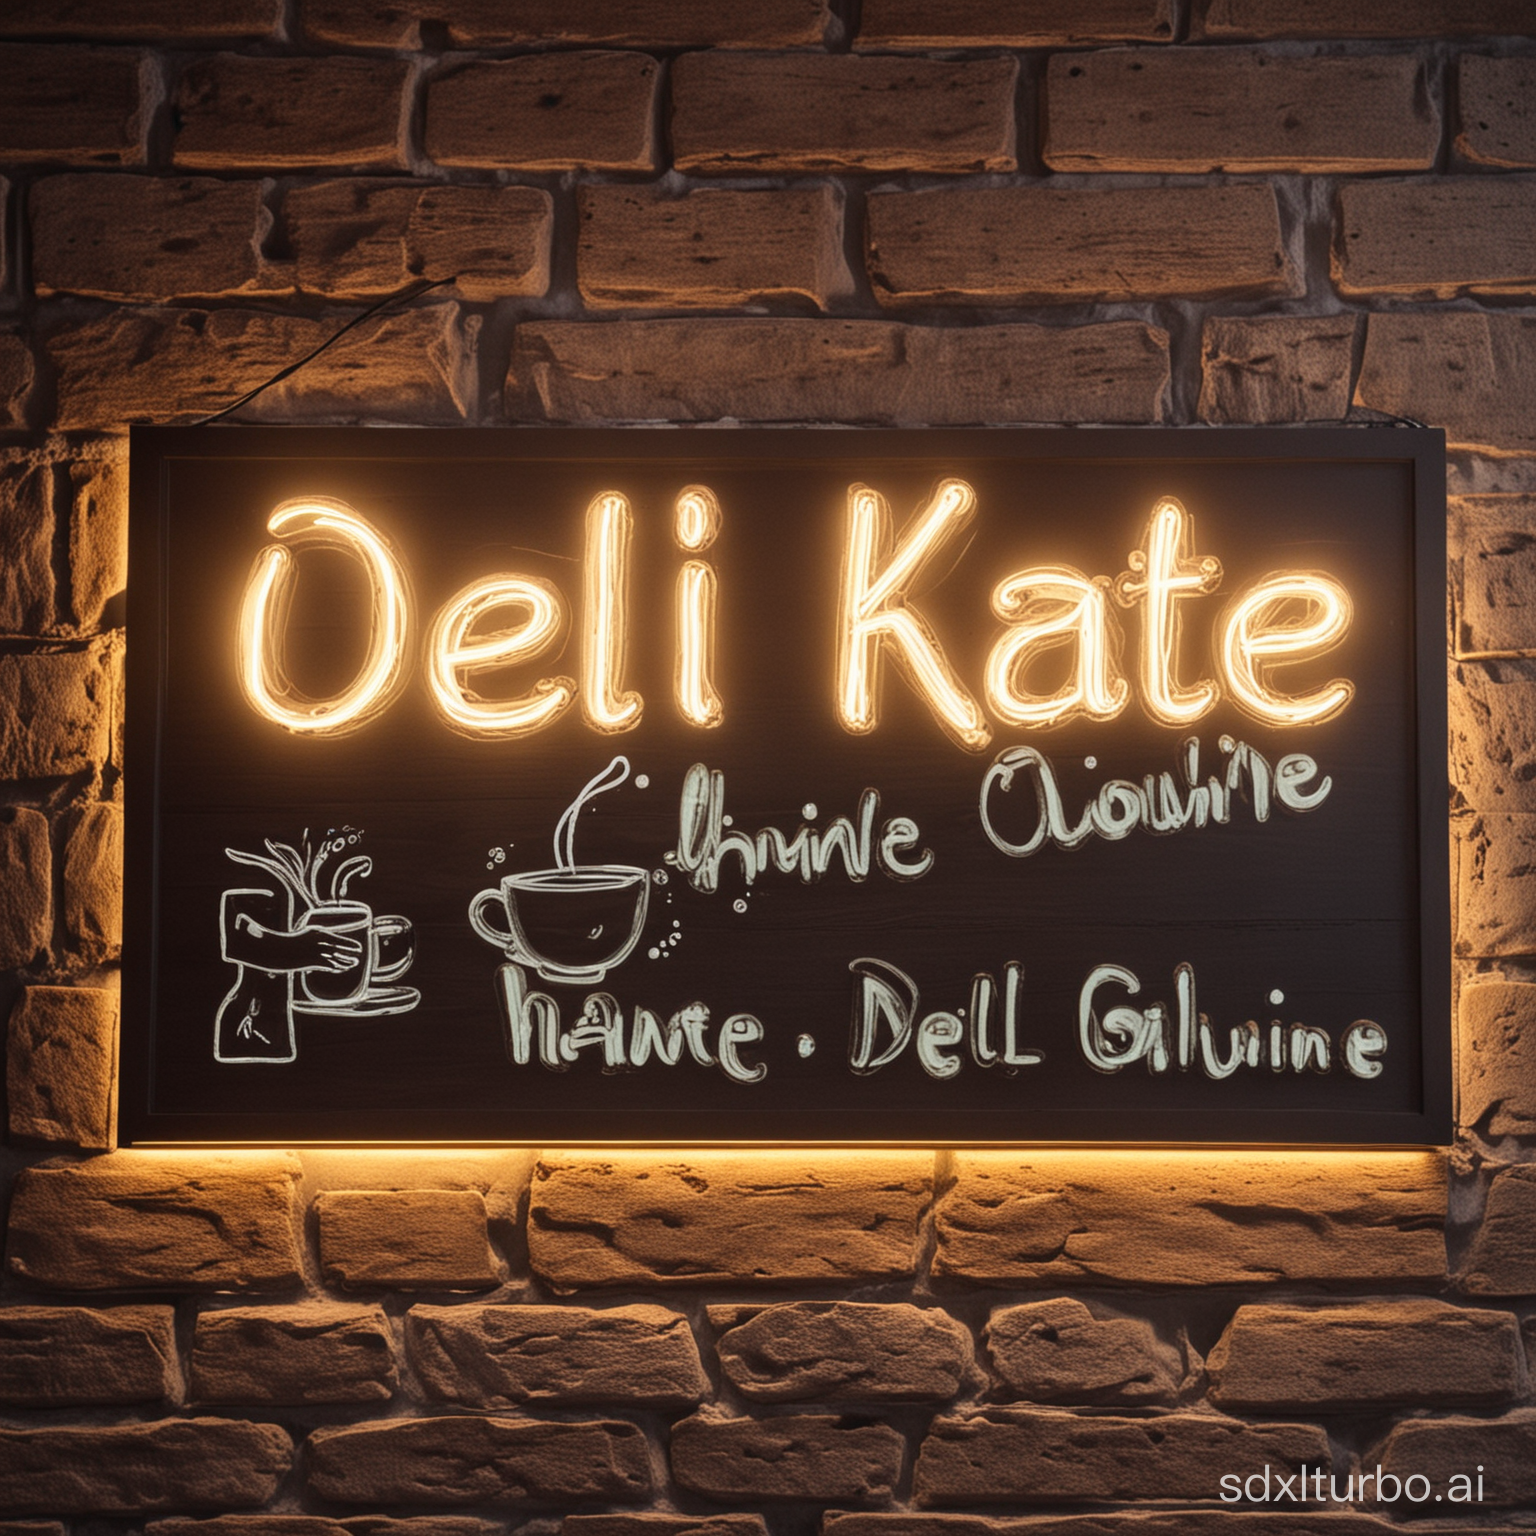 Cafe  named "Deli- Kate". Board with glowshine lighting 